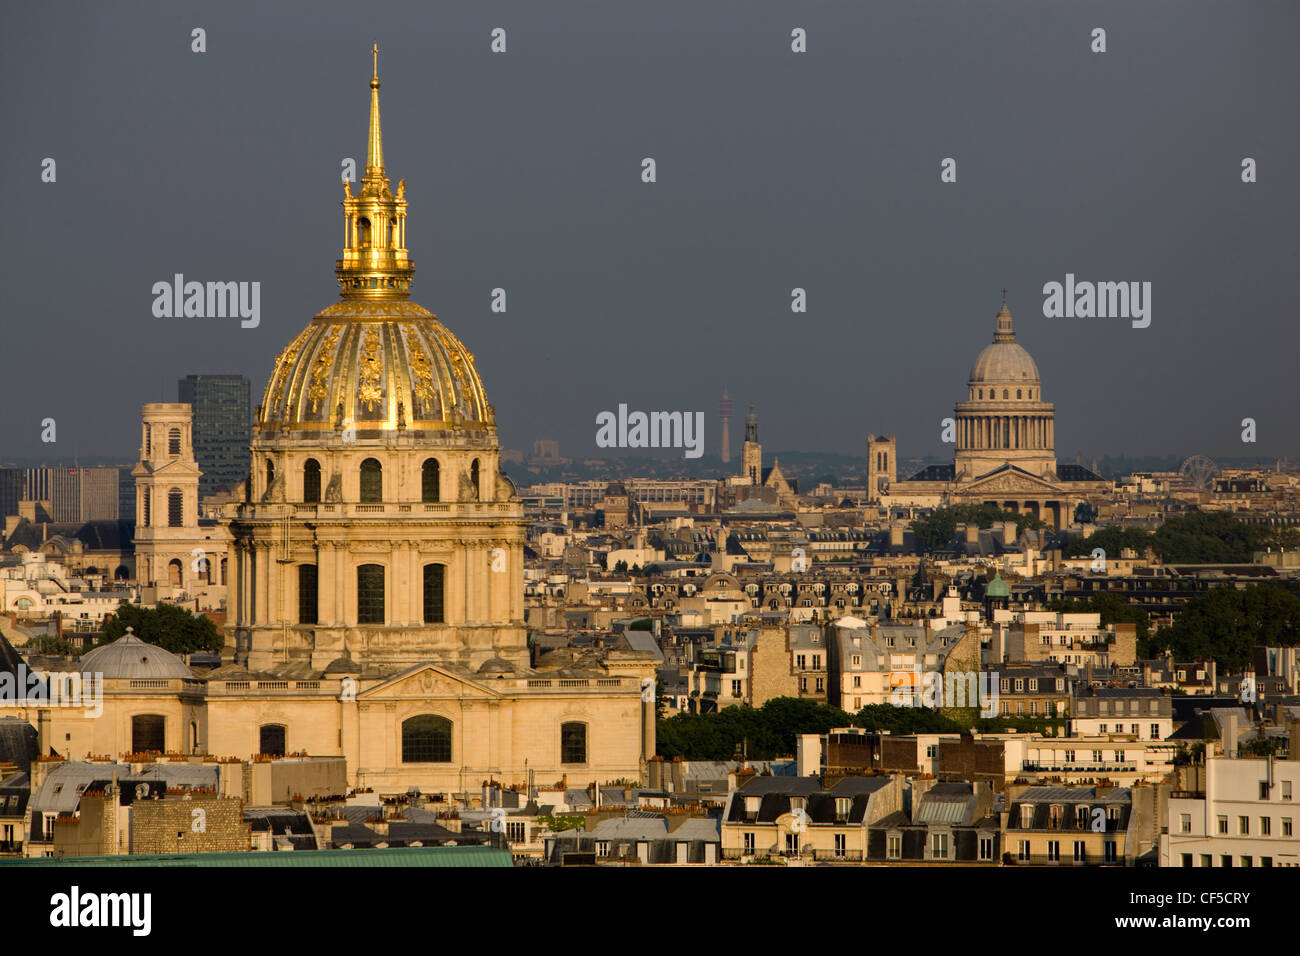 The golden dome of Les Invalides, known as The Dôme des Invalides, in Paris Stock Photo